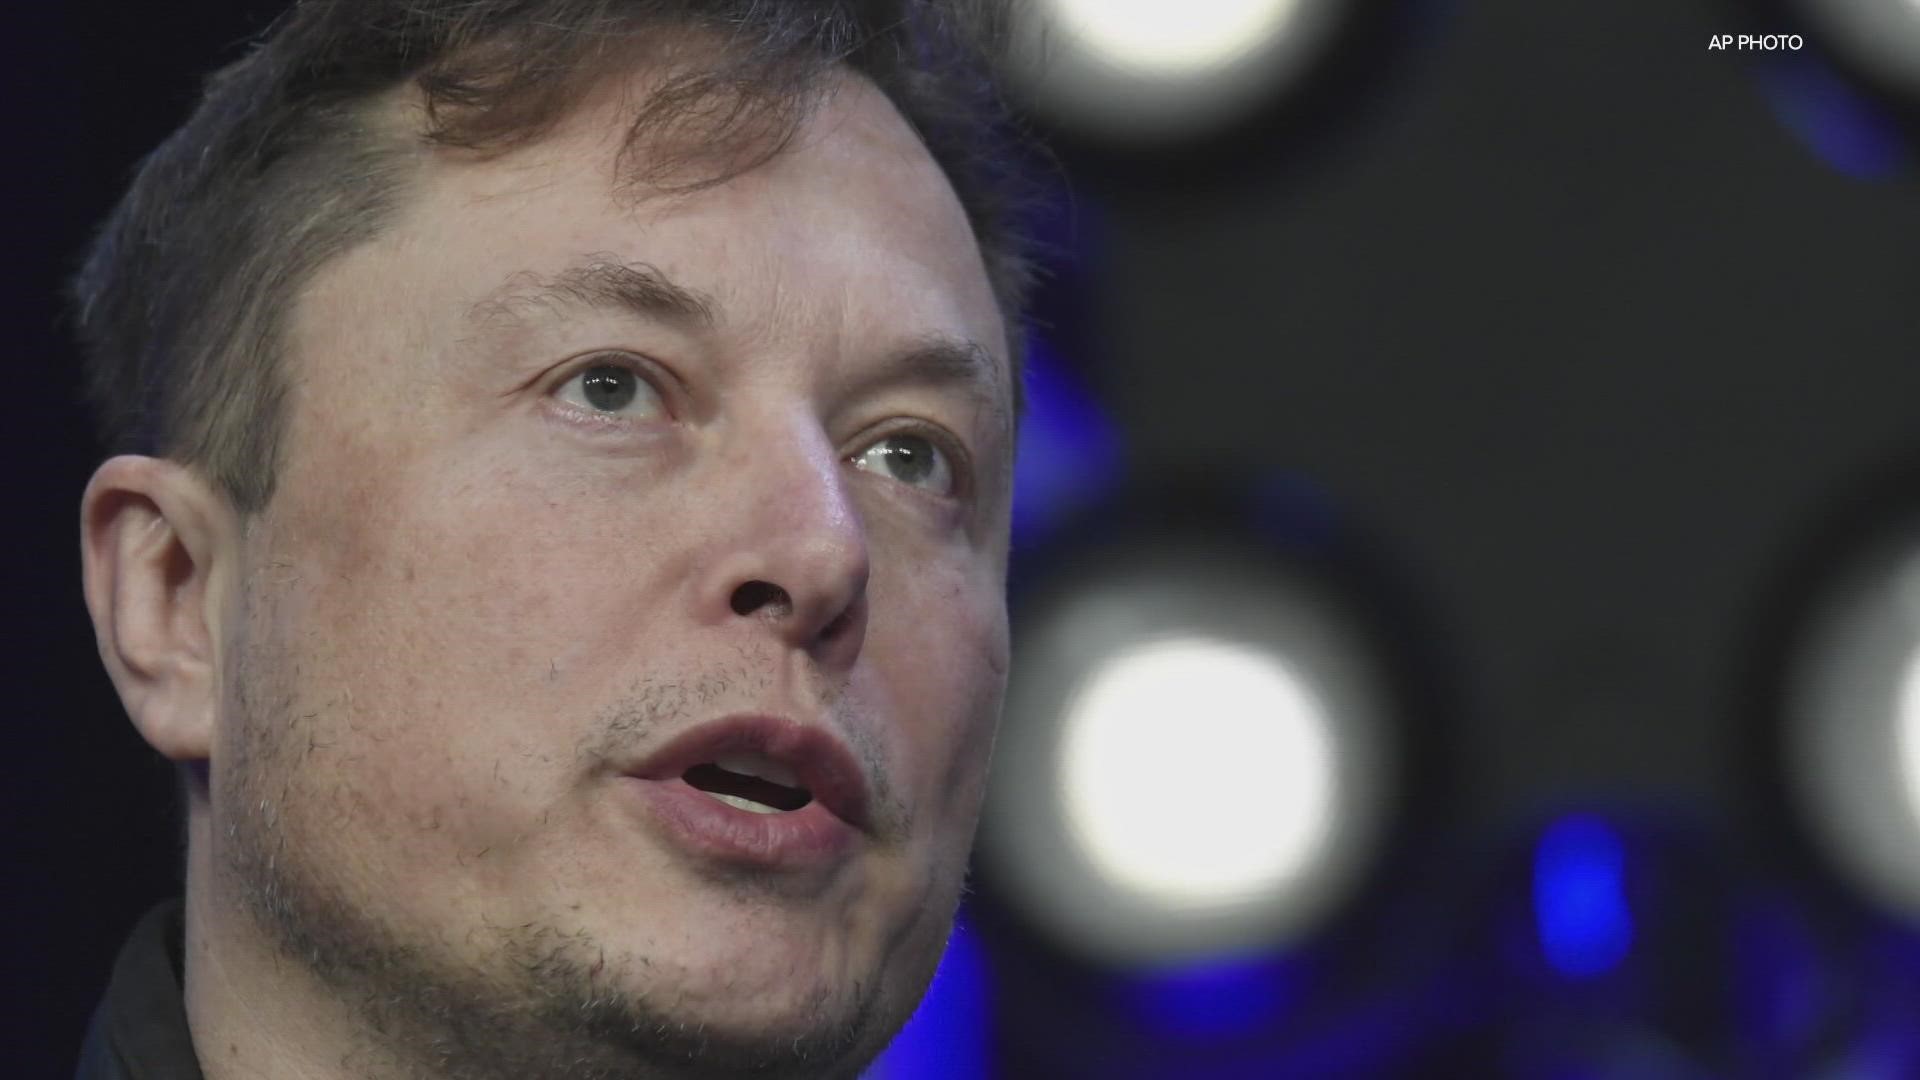 Elon Musk is moving forward with his deal to buy Twitter at $54 dollars a share.